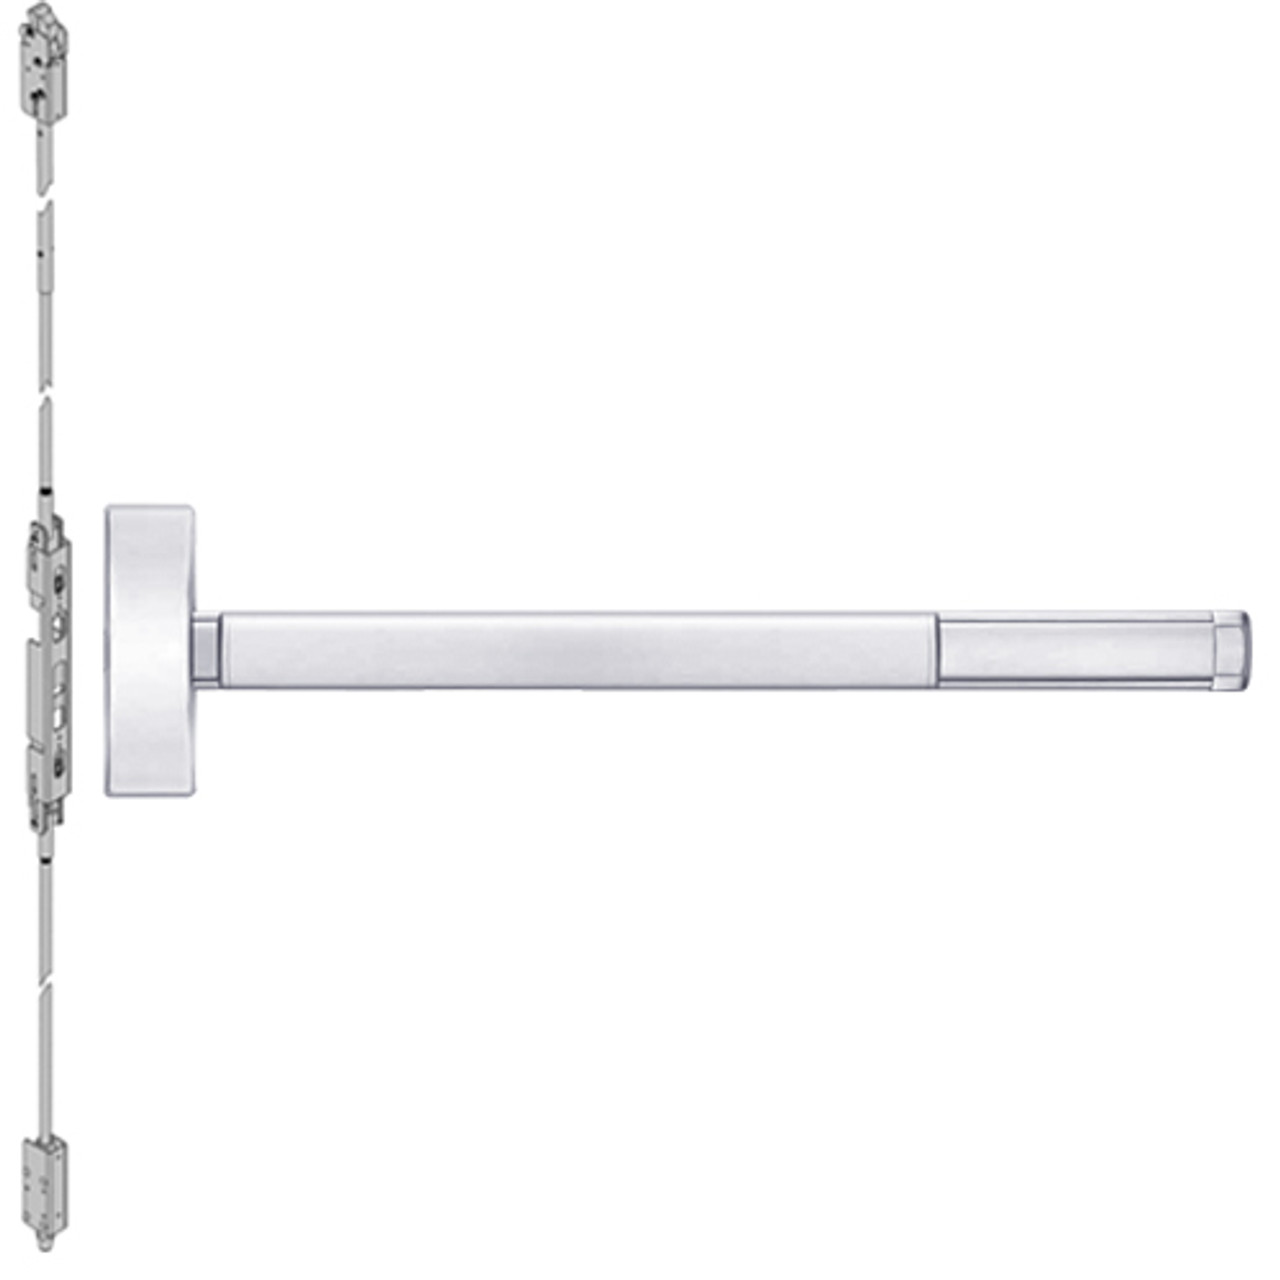 2814-625-36 PHI 2800 Series Non Fire Rated Concealed Vertical Rod Exit Device Prepped for Lever-Knob Always Active in Bright Chrome Finish